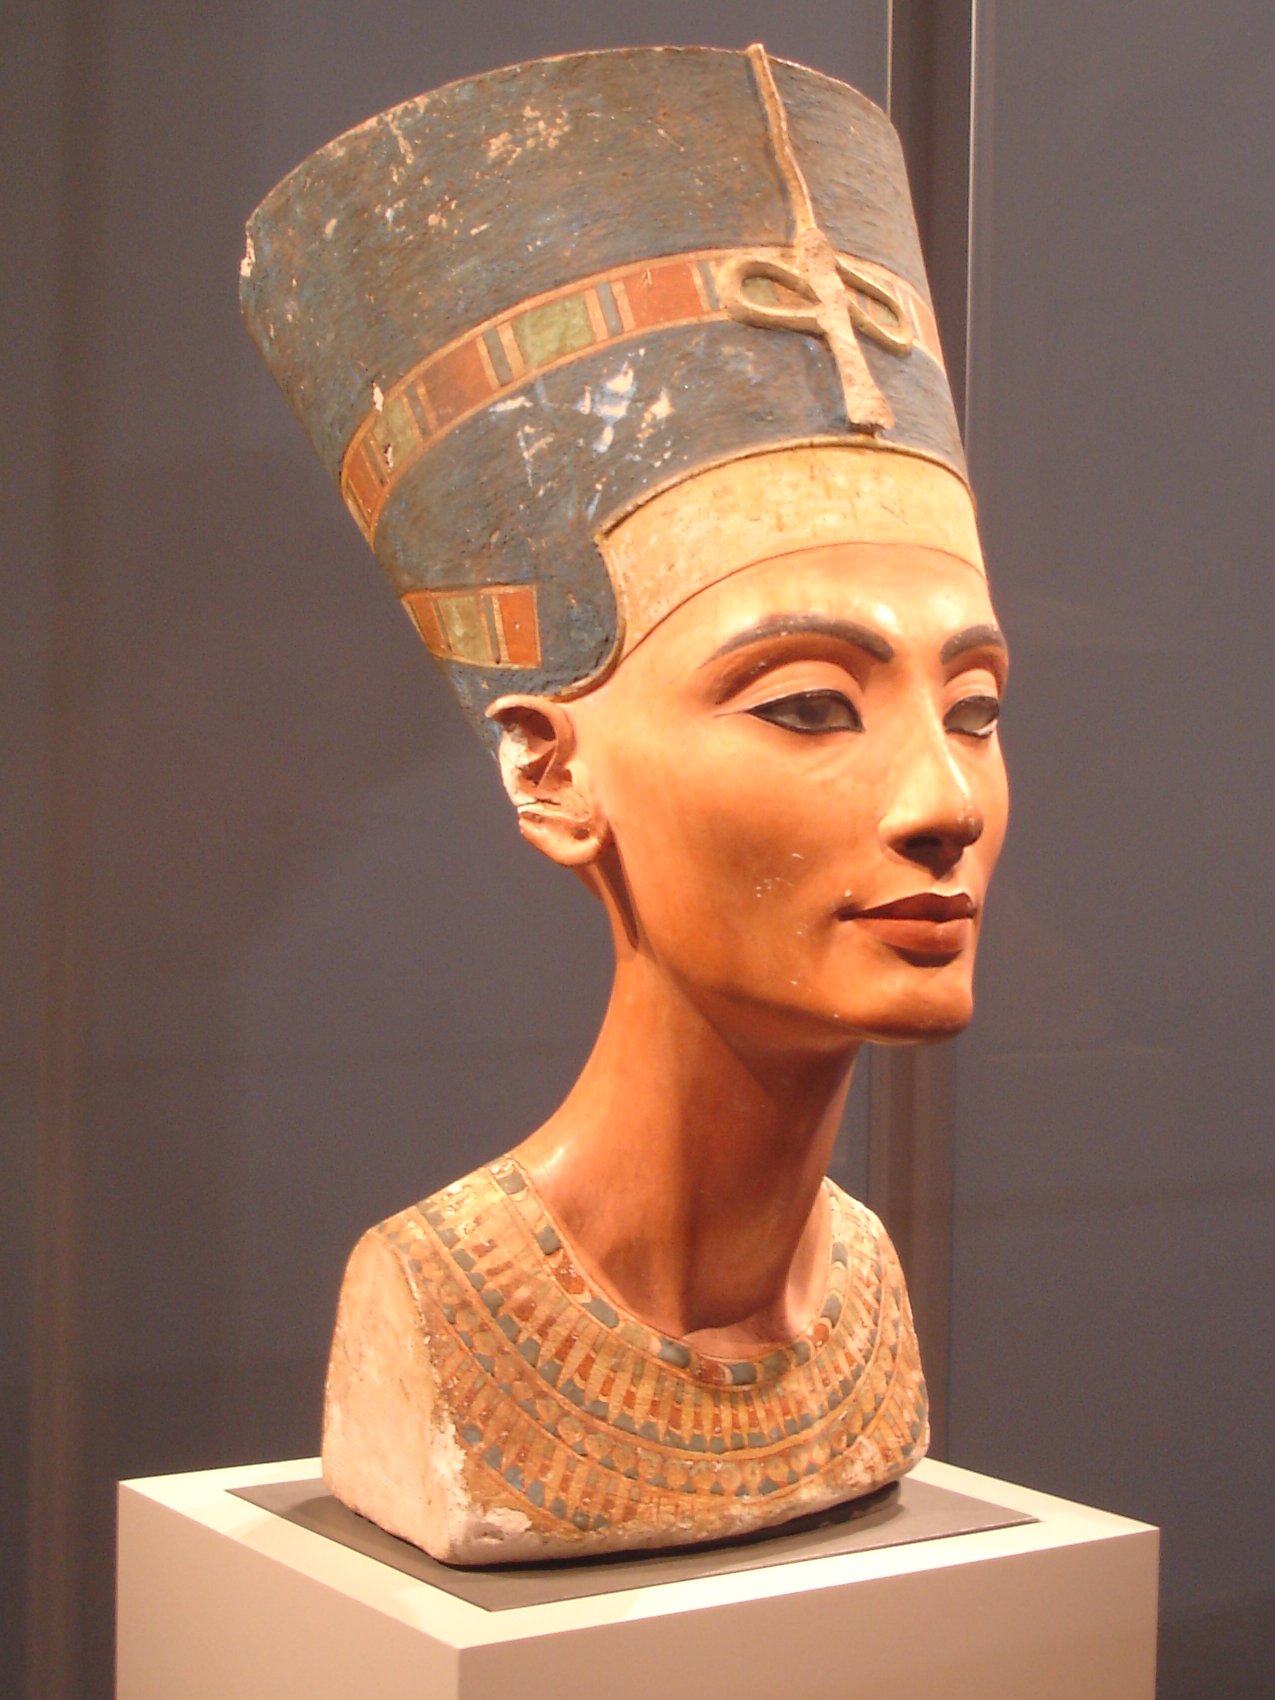 Queen Nefertiti Bust at Neues Museum, Berlin, Germany. Photo taken on April 18, 2006.